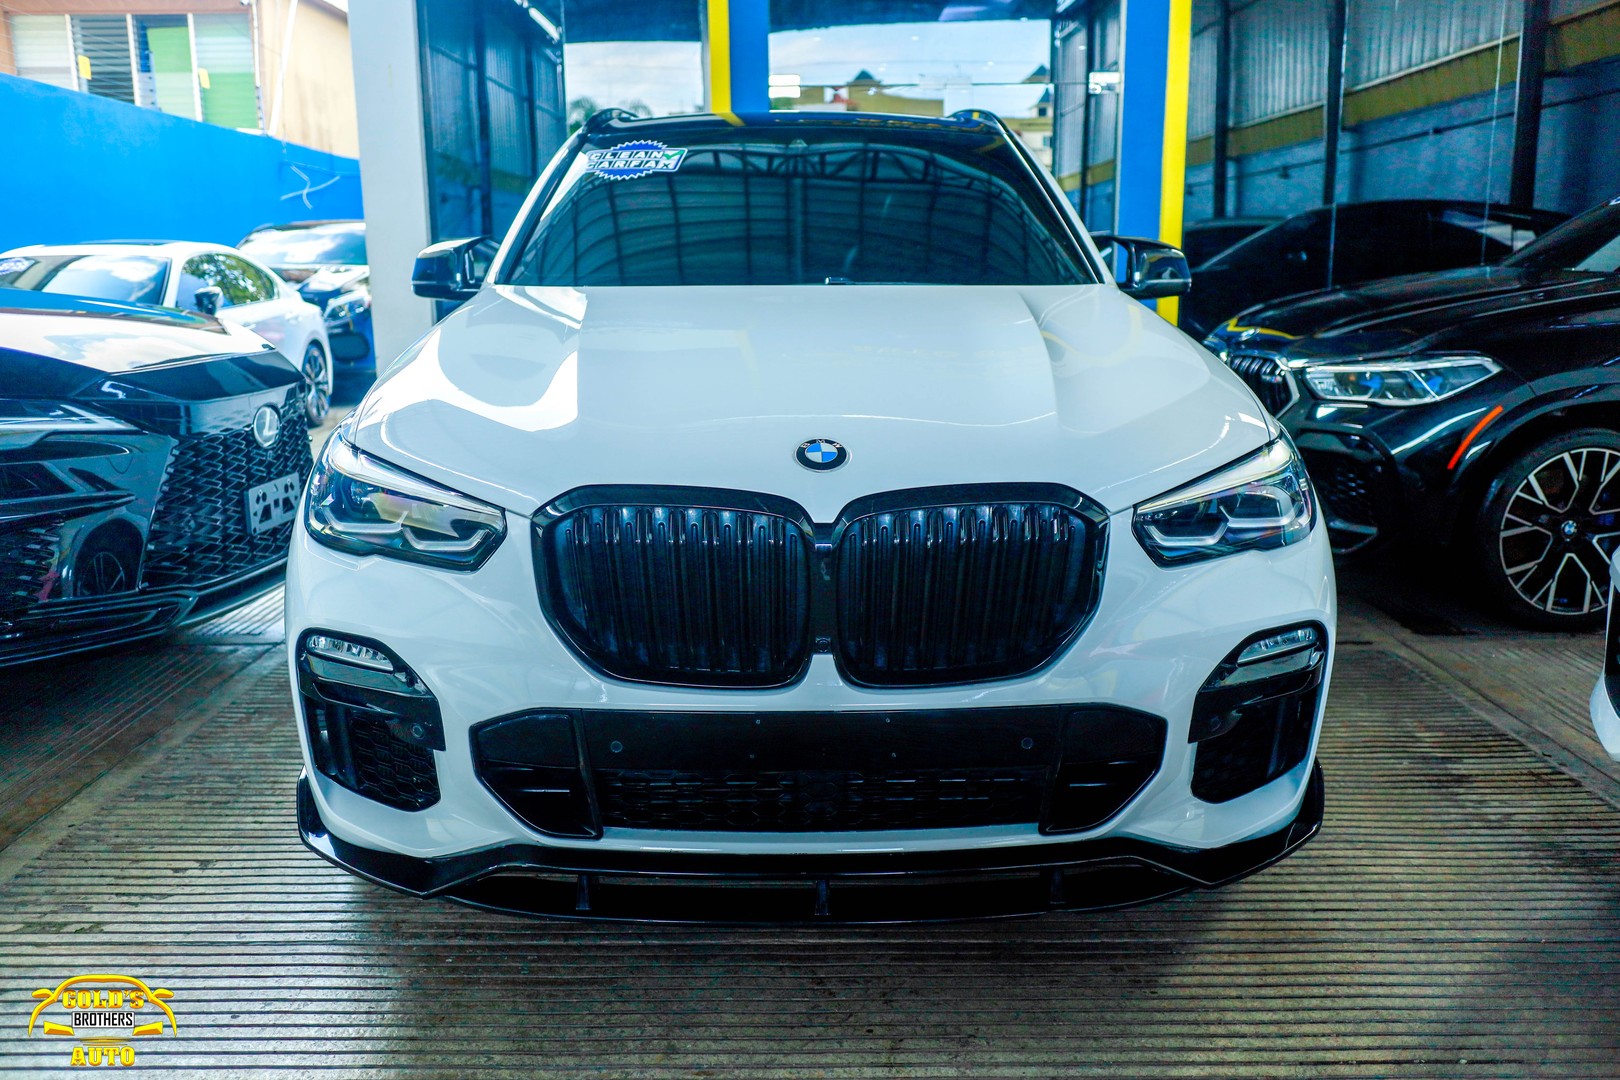 jeepetas y camionetas - BMW X5 M Package 2019 Clean Carfax 1